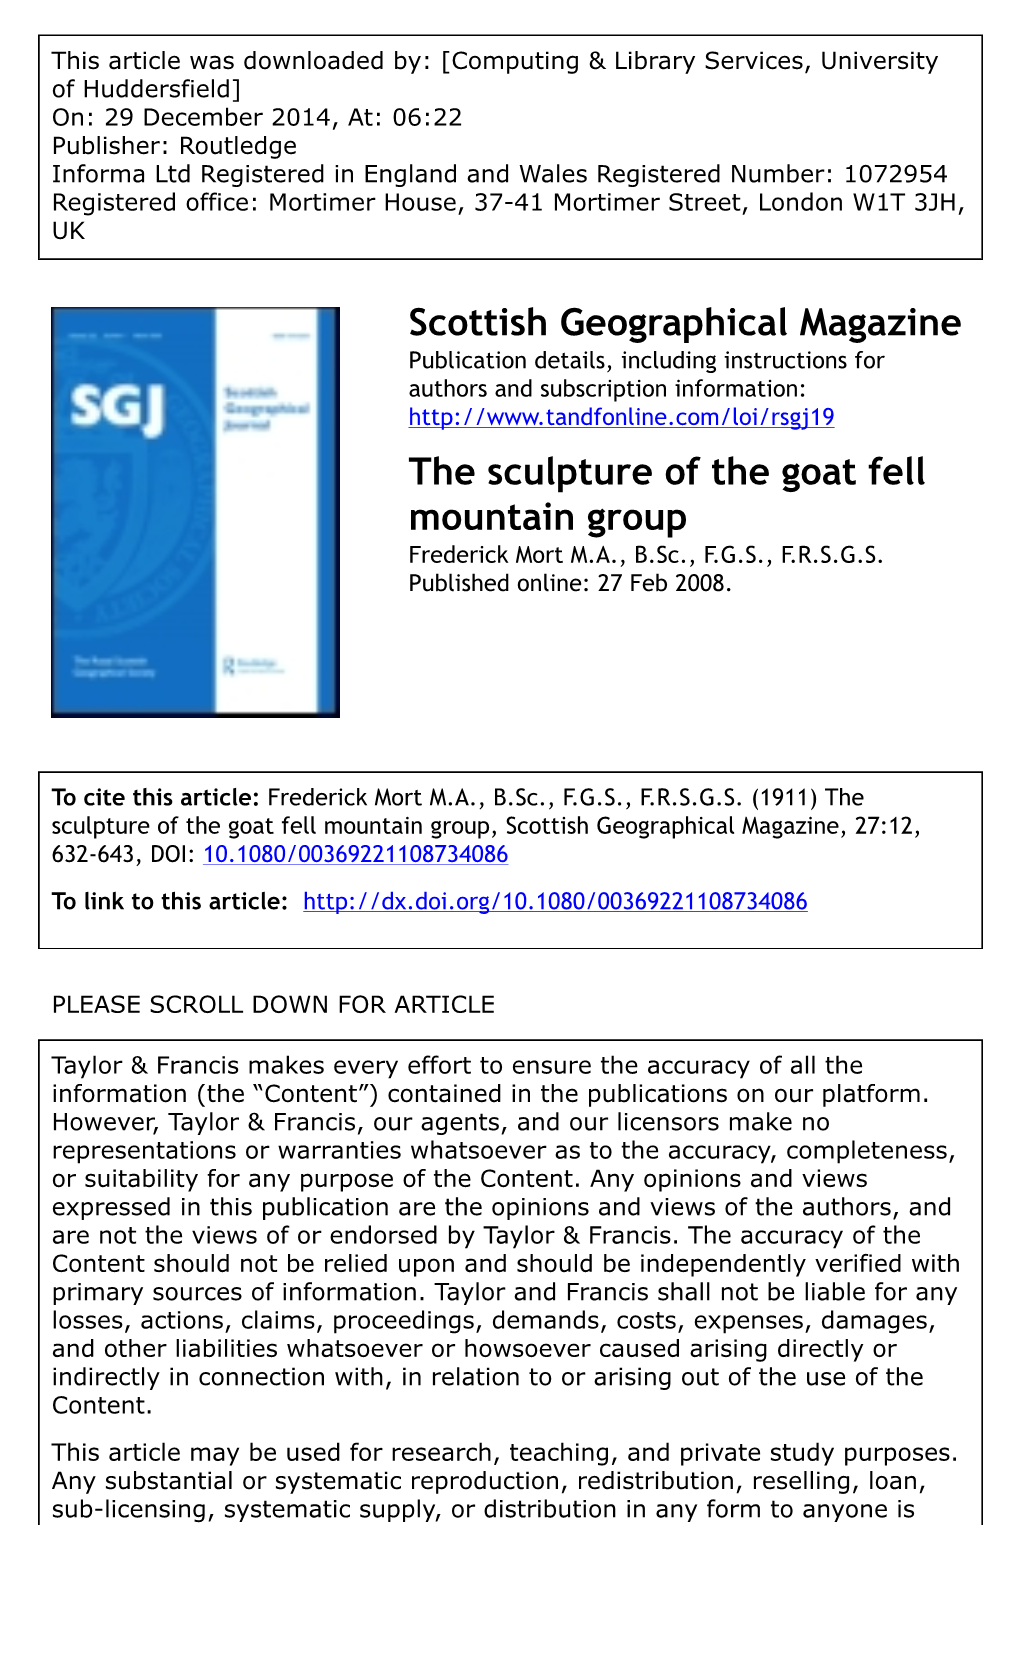 Scottish Geographical Magazine the Sculpture of the Goat Fell Mountain